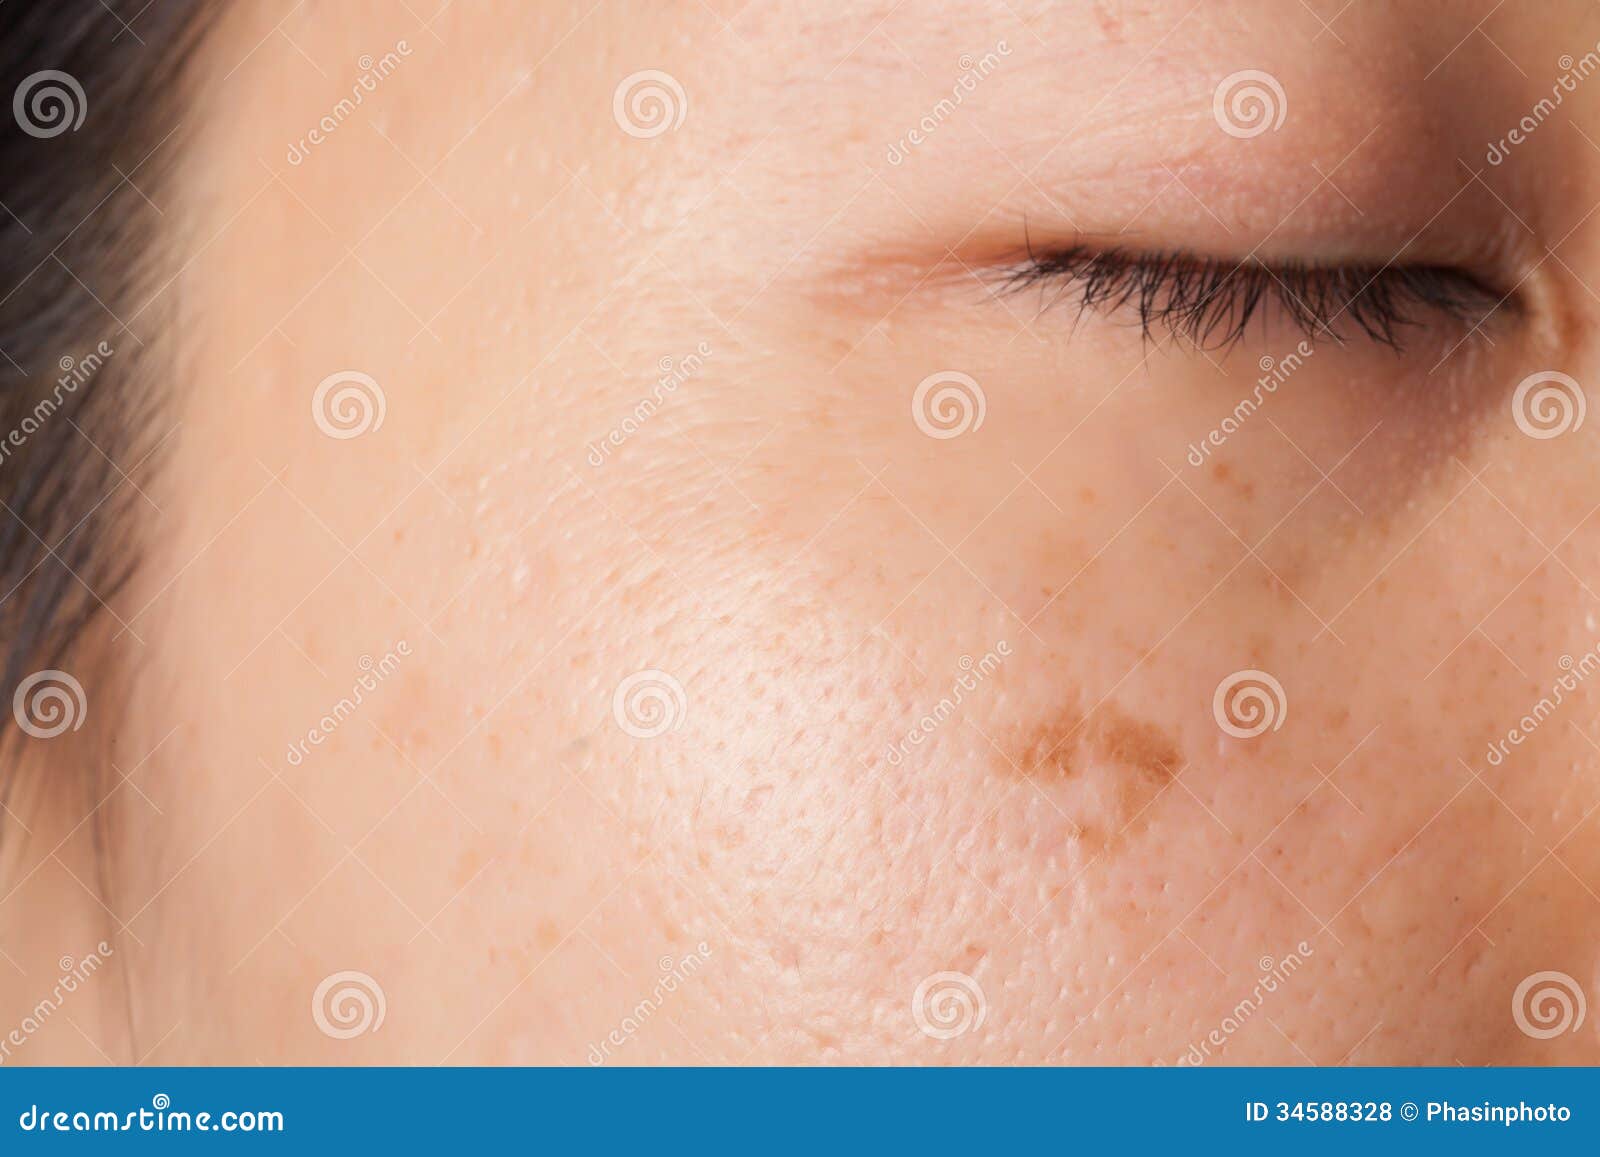 blemish and spots